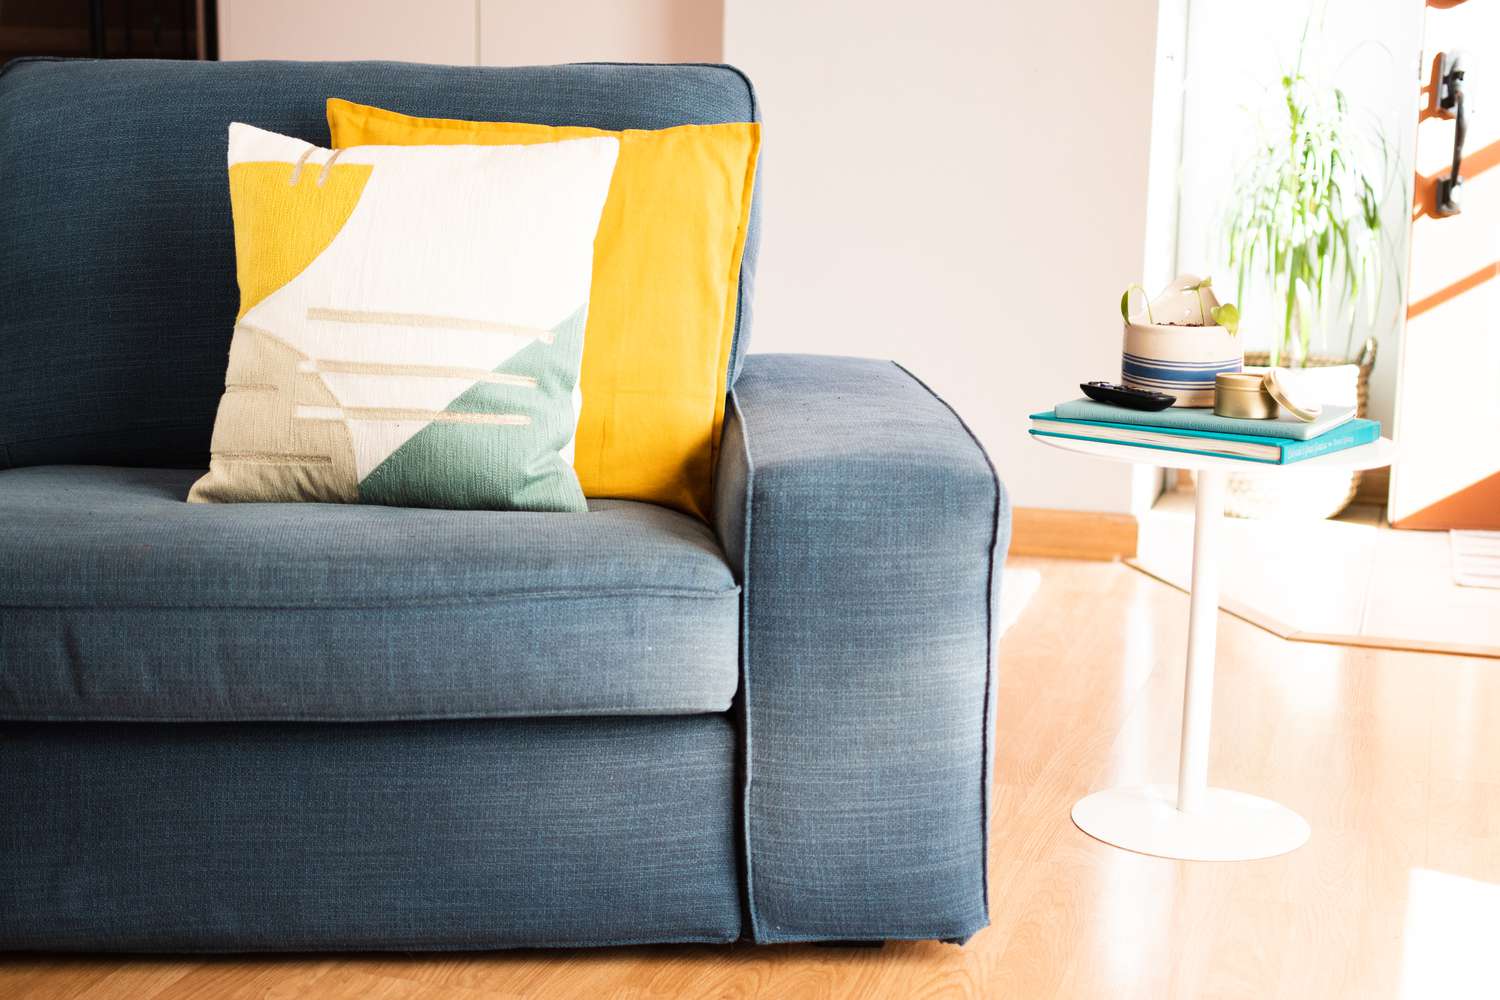  City Upholstery Cleaning Melbourne